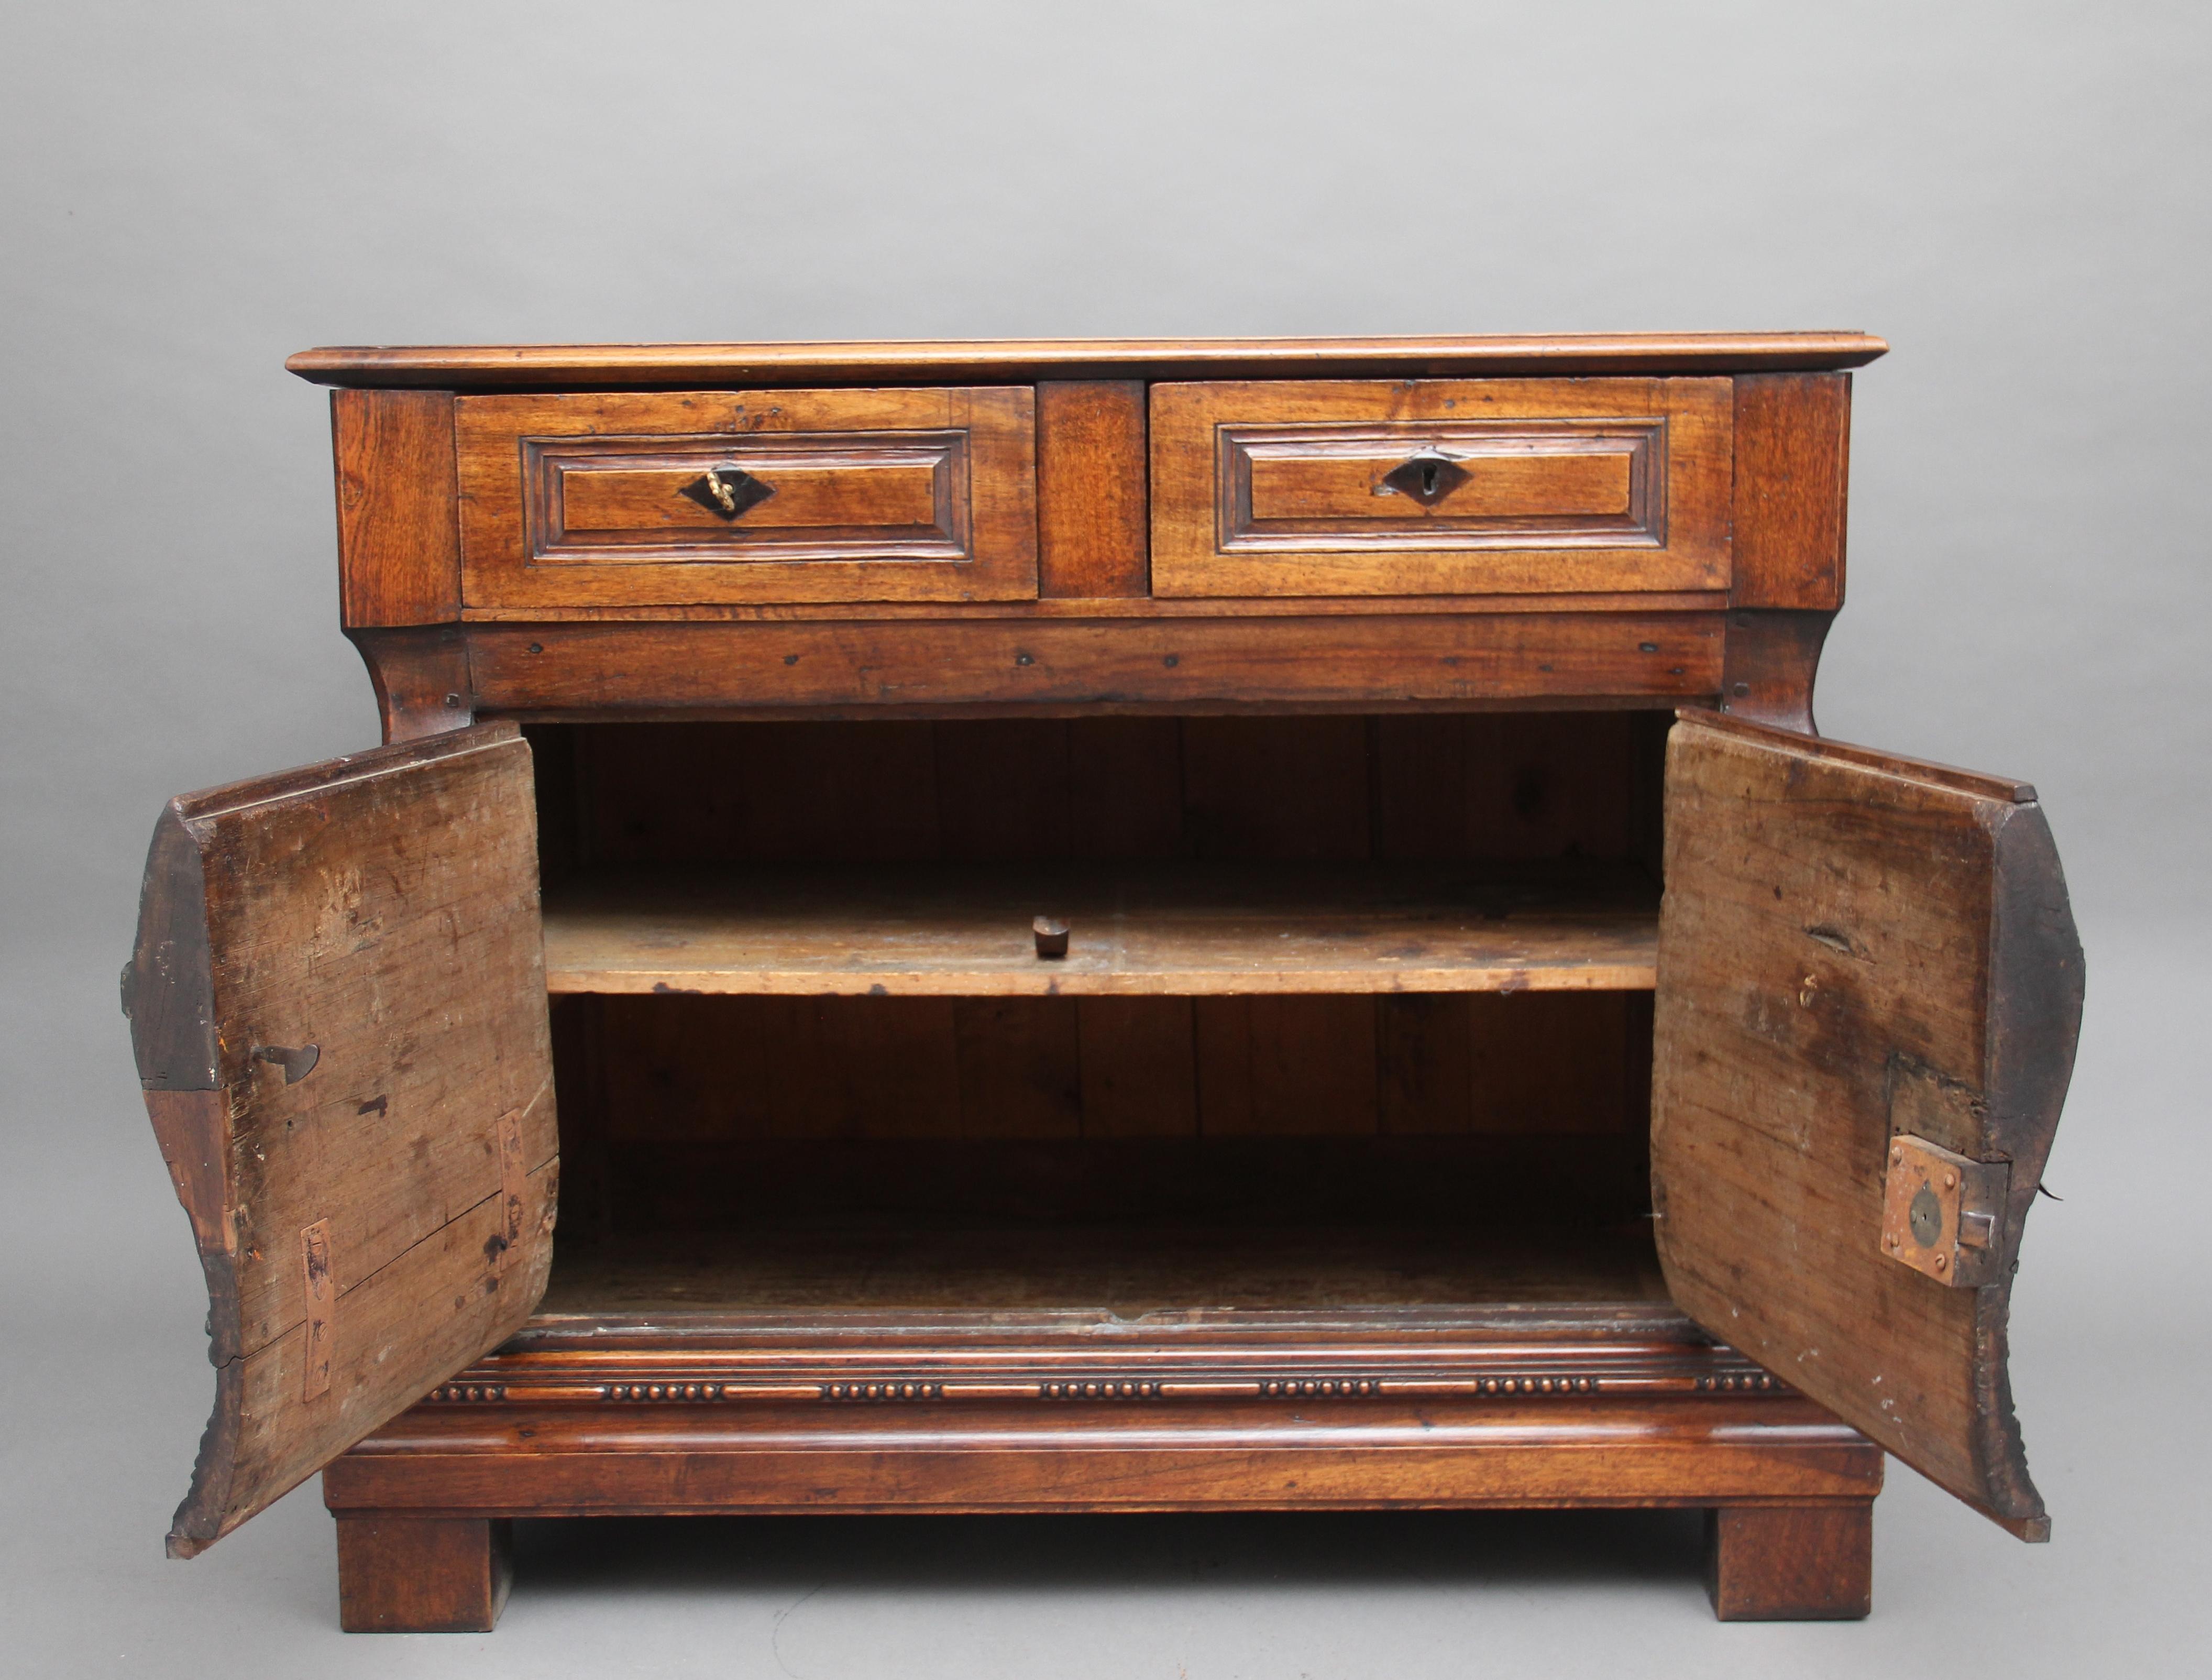 An unusual and rare 18th century French walnut Bombay commode, the thumb moulded edge above two large drawers with original locks, and moulded drawer fronts, two shaped cupboard doors below opening to reveal a fixed single shelf inside, the door